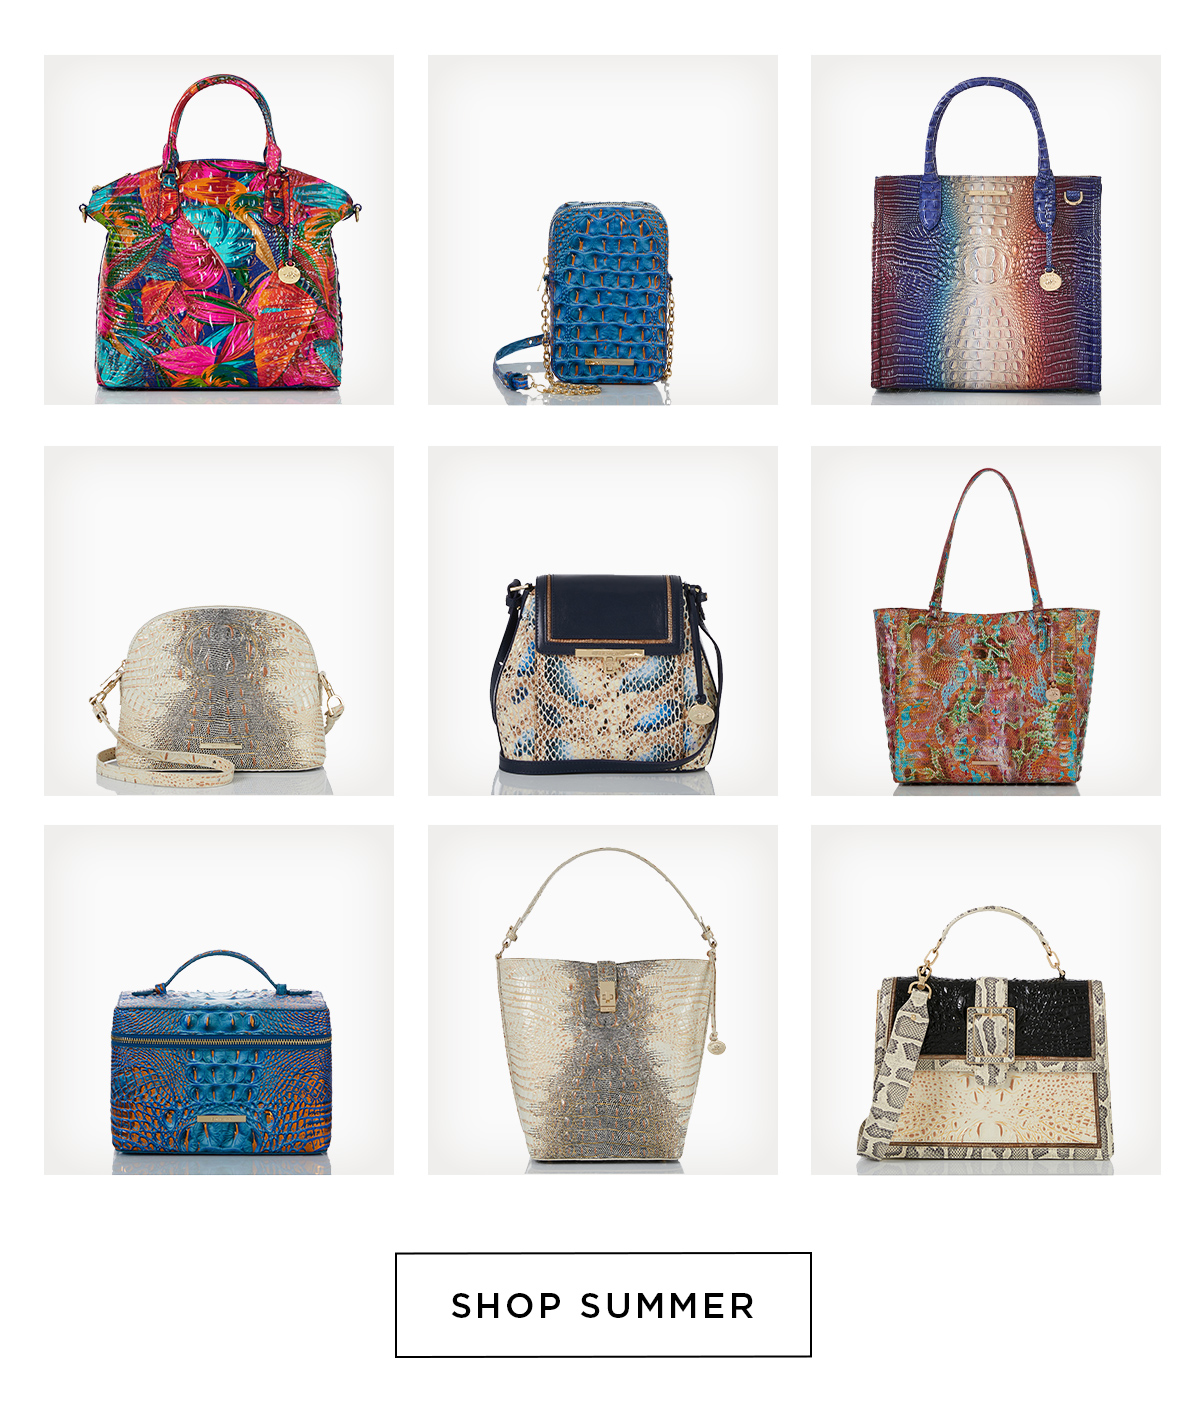 Brahmin Handbags - Ready, set. shop! Our FIRST EVER online outlet sale  starts TODAY! Score major deals on 175+ styles now through 6/28 11:59PM  EST. Terms and conditions apply.